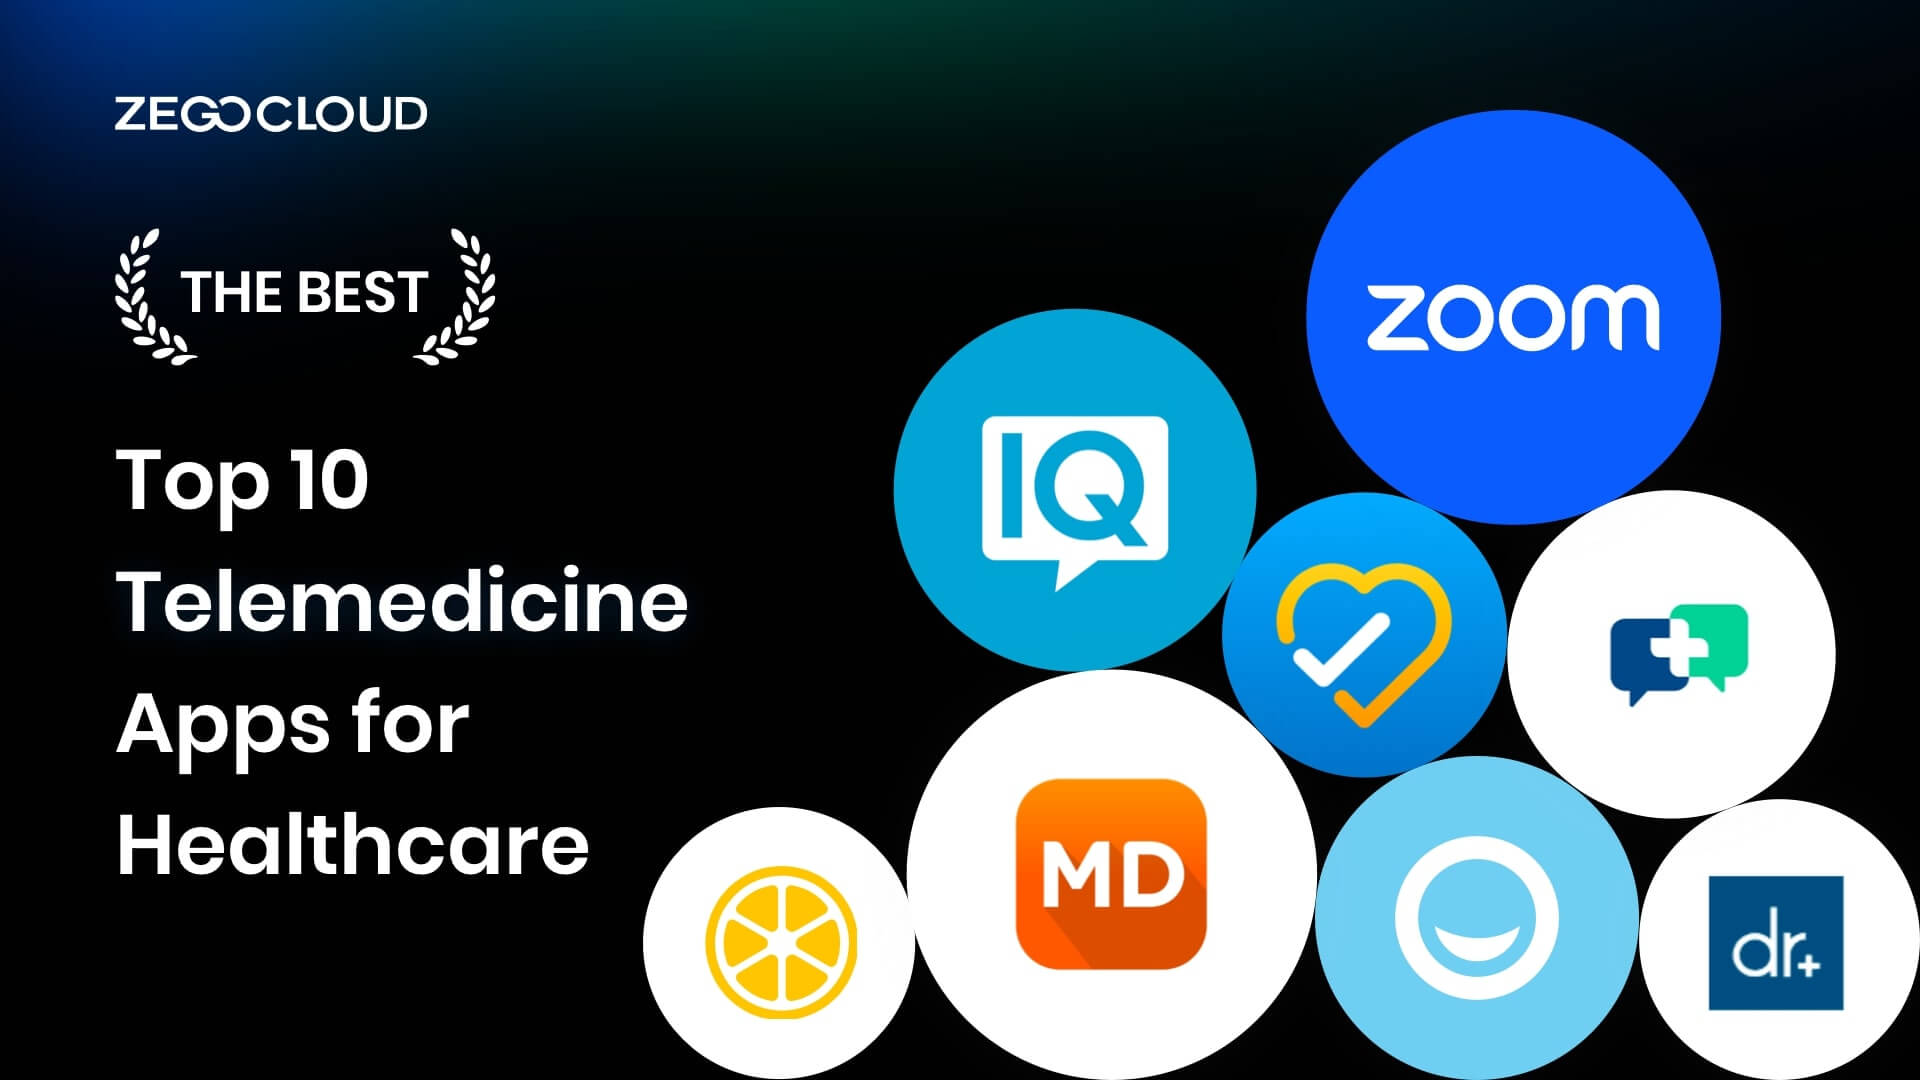 Top 10 Telemedicine Apps for Healthcare